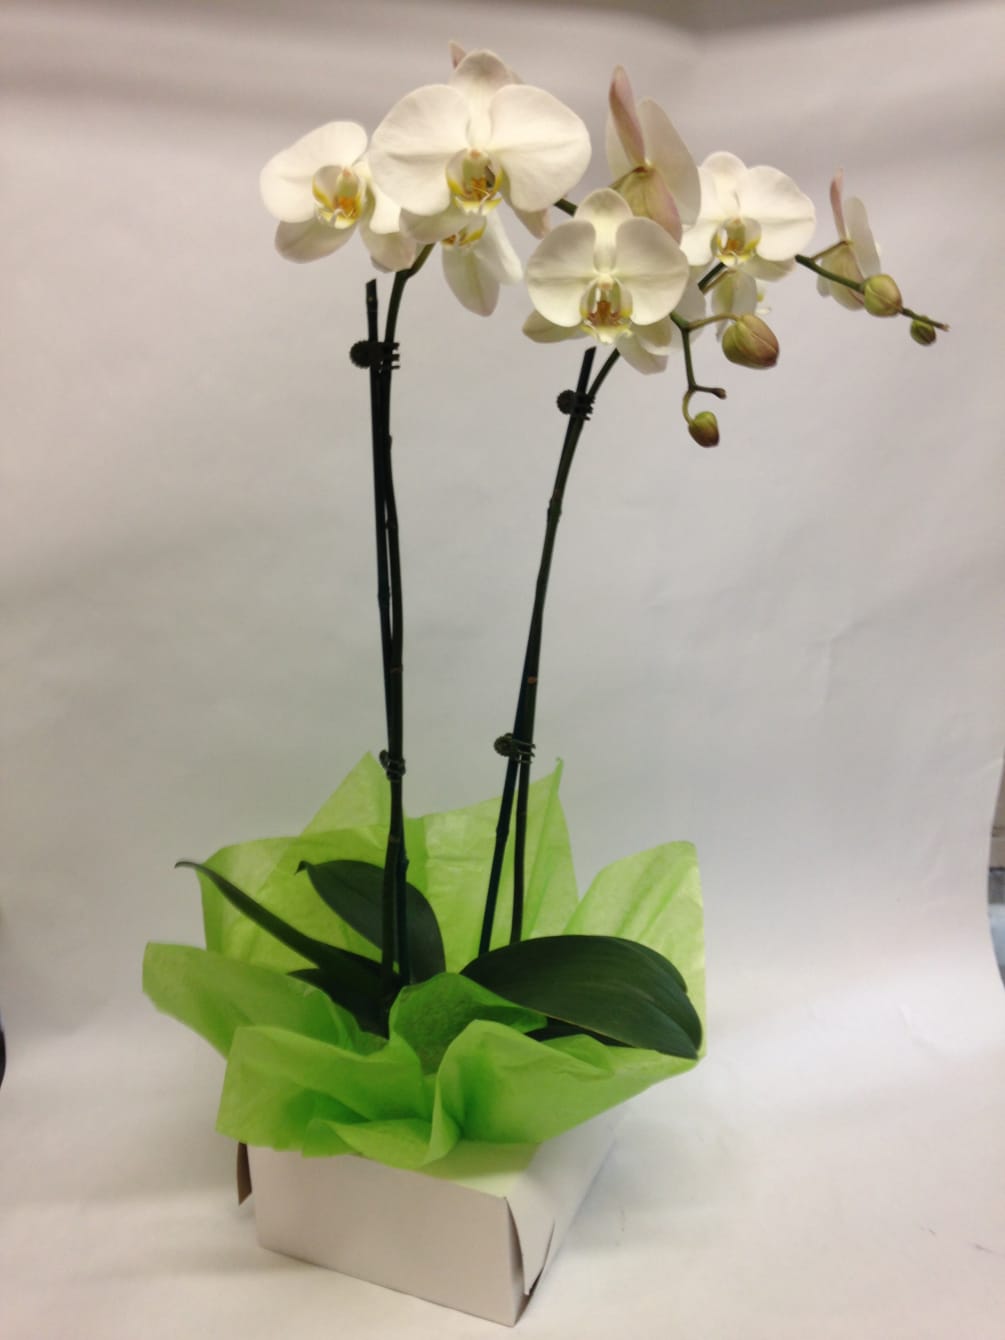 This 2 stems  white orchid comes complete with a ceramic pot